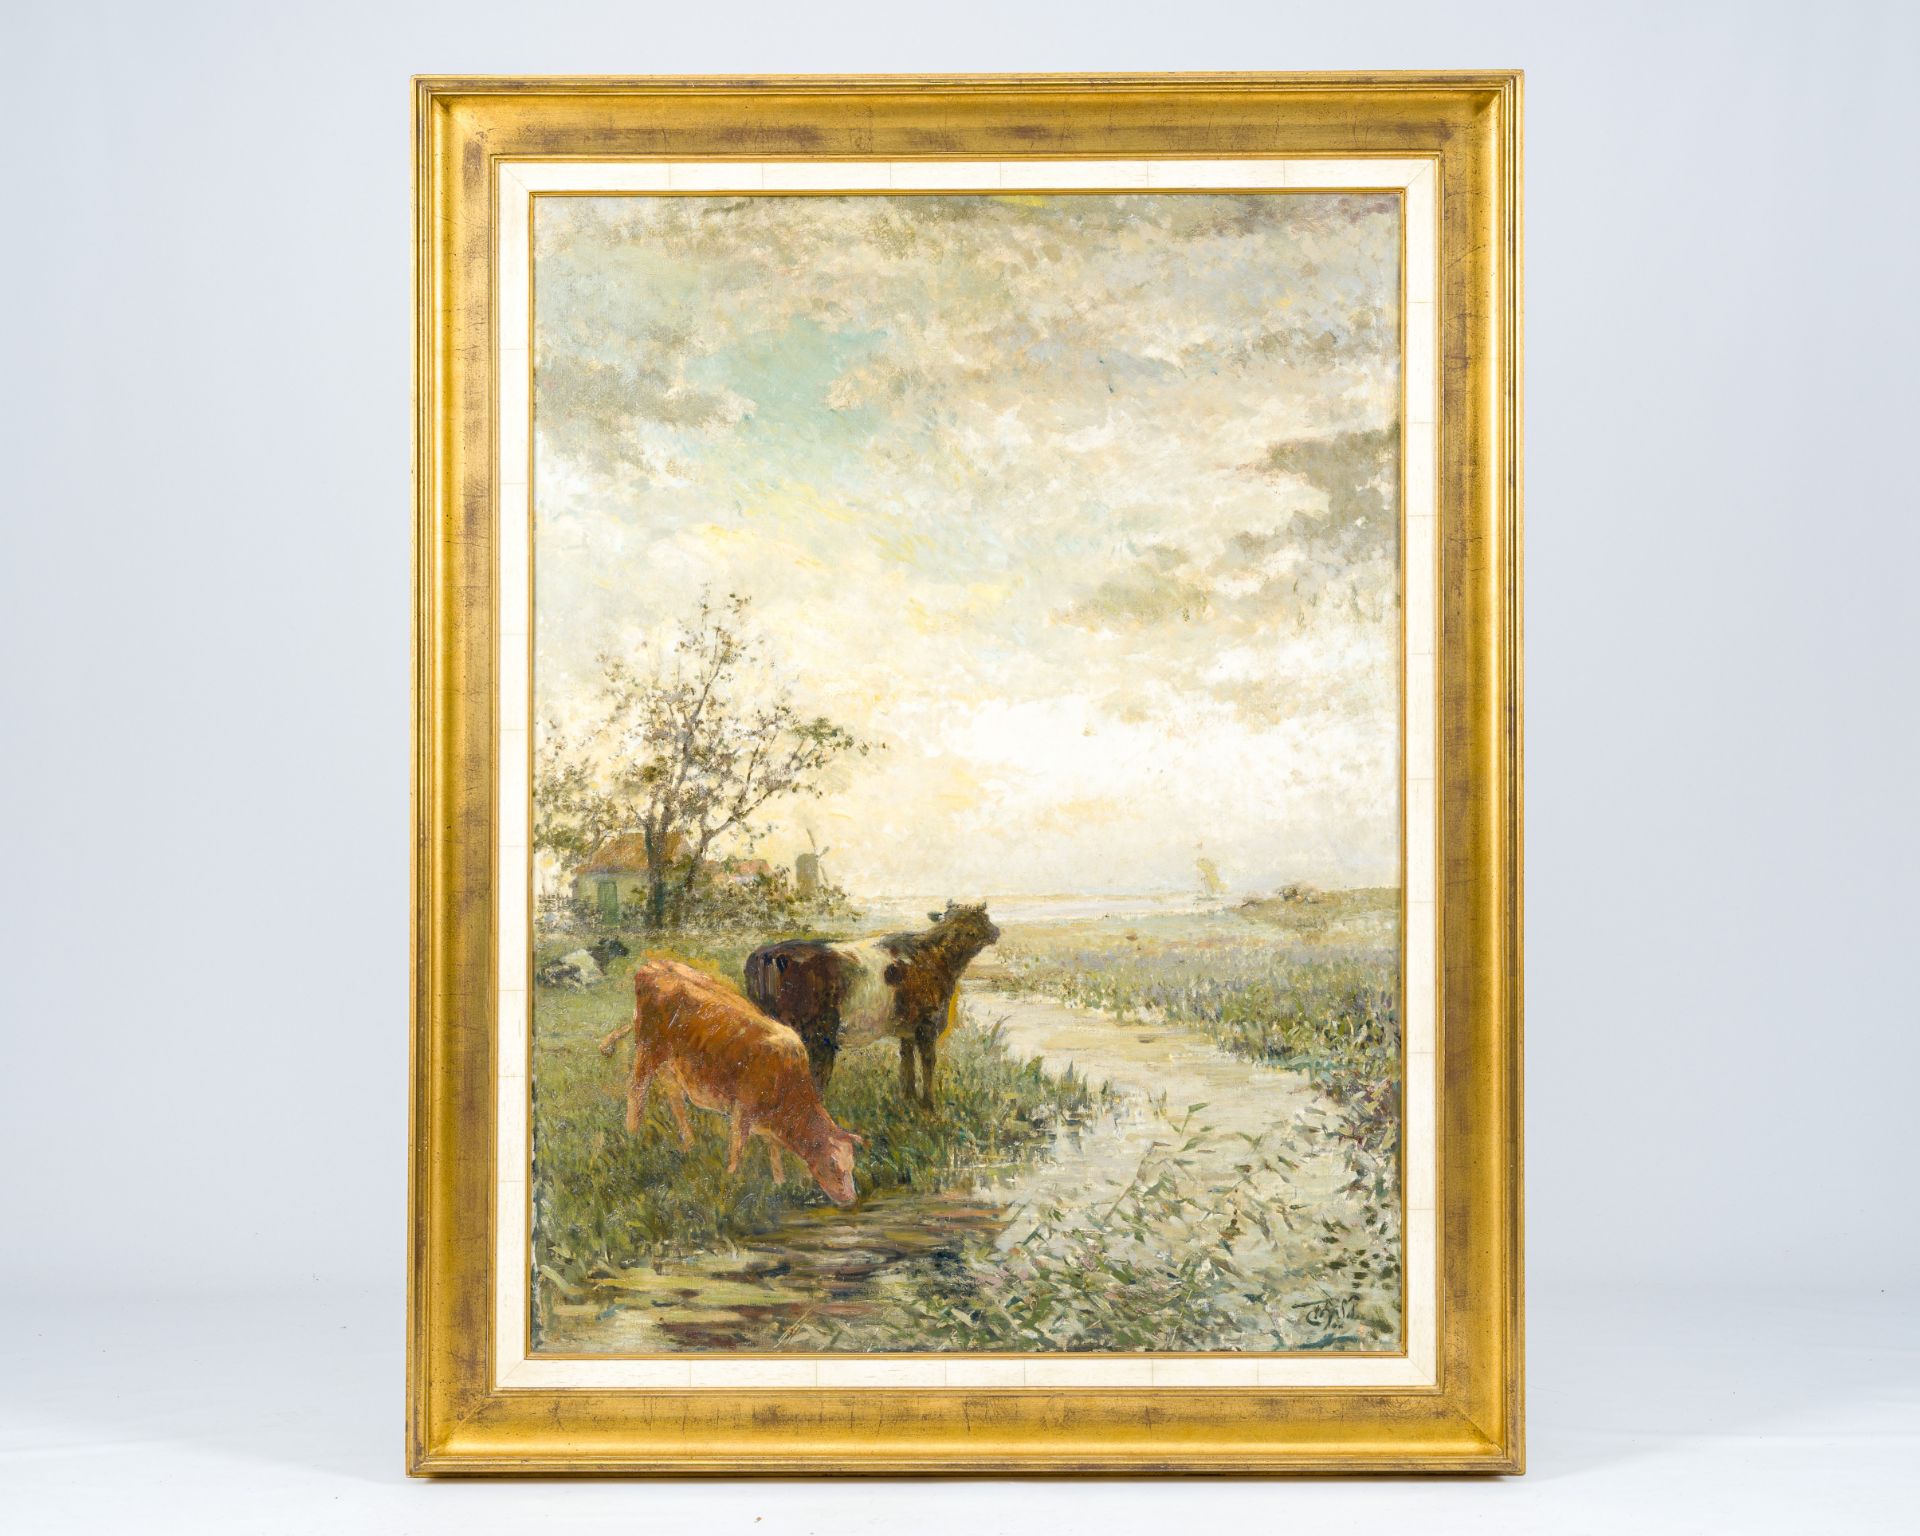 Henri Van Seben (1825-1913): Landscape with cattle by a stream in the foreground, oil on canvas - Image 2 of 5